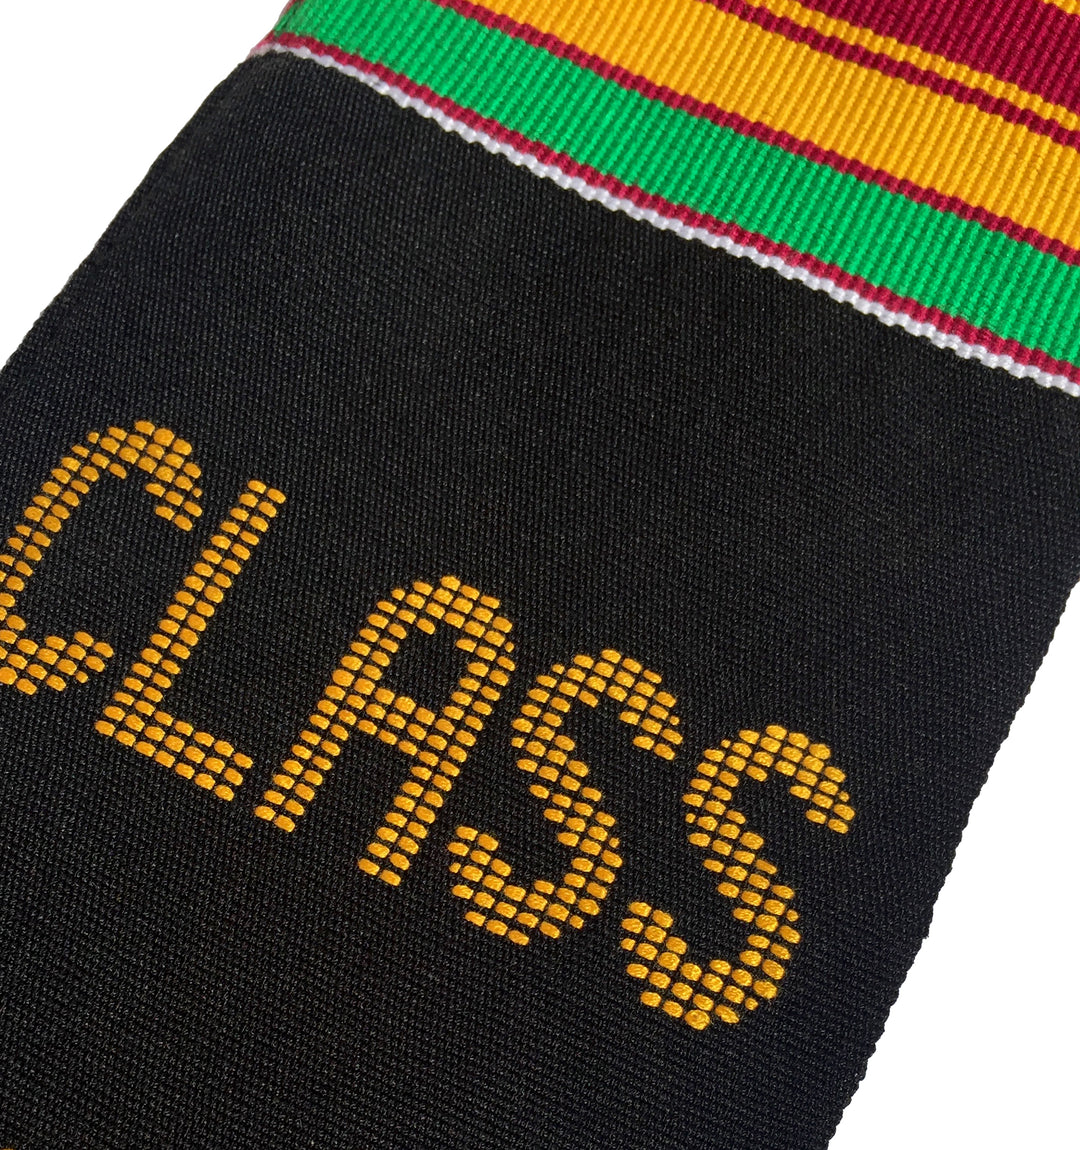 Two Degrees Hotter Class of 2023 Kente Graduation Stole